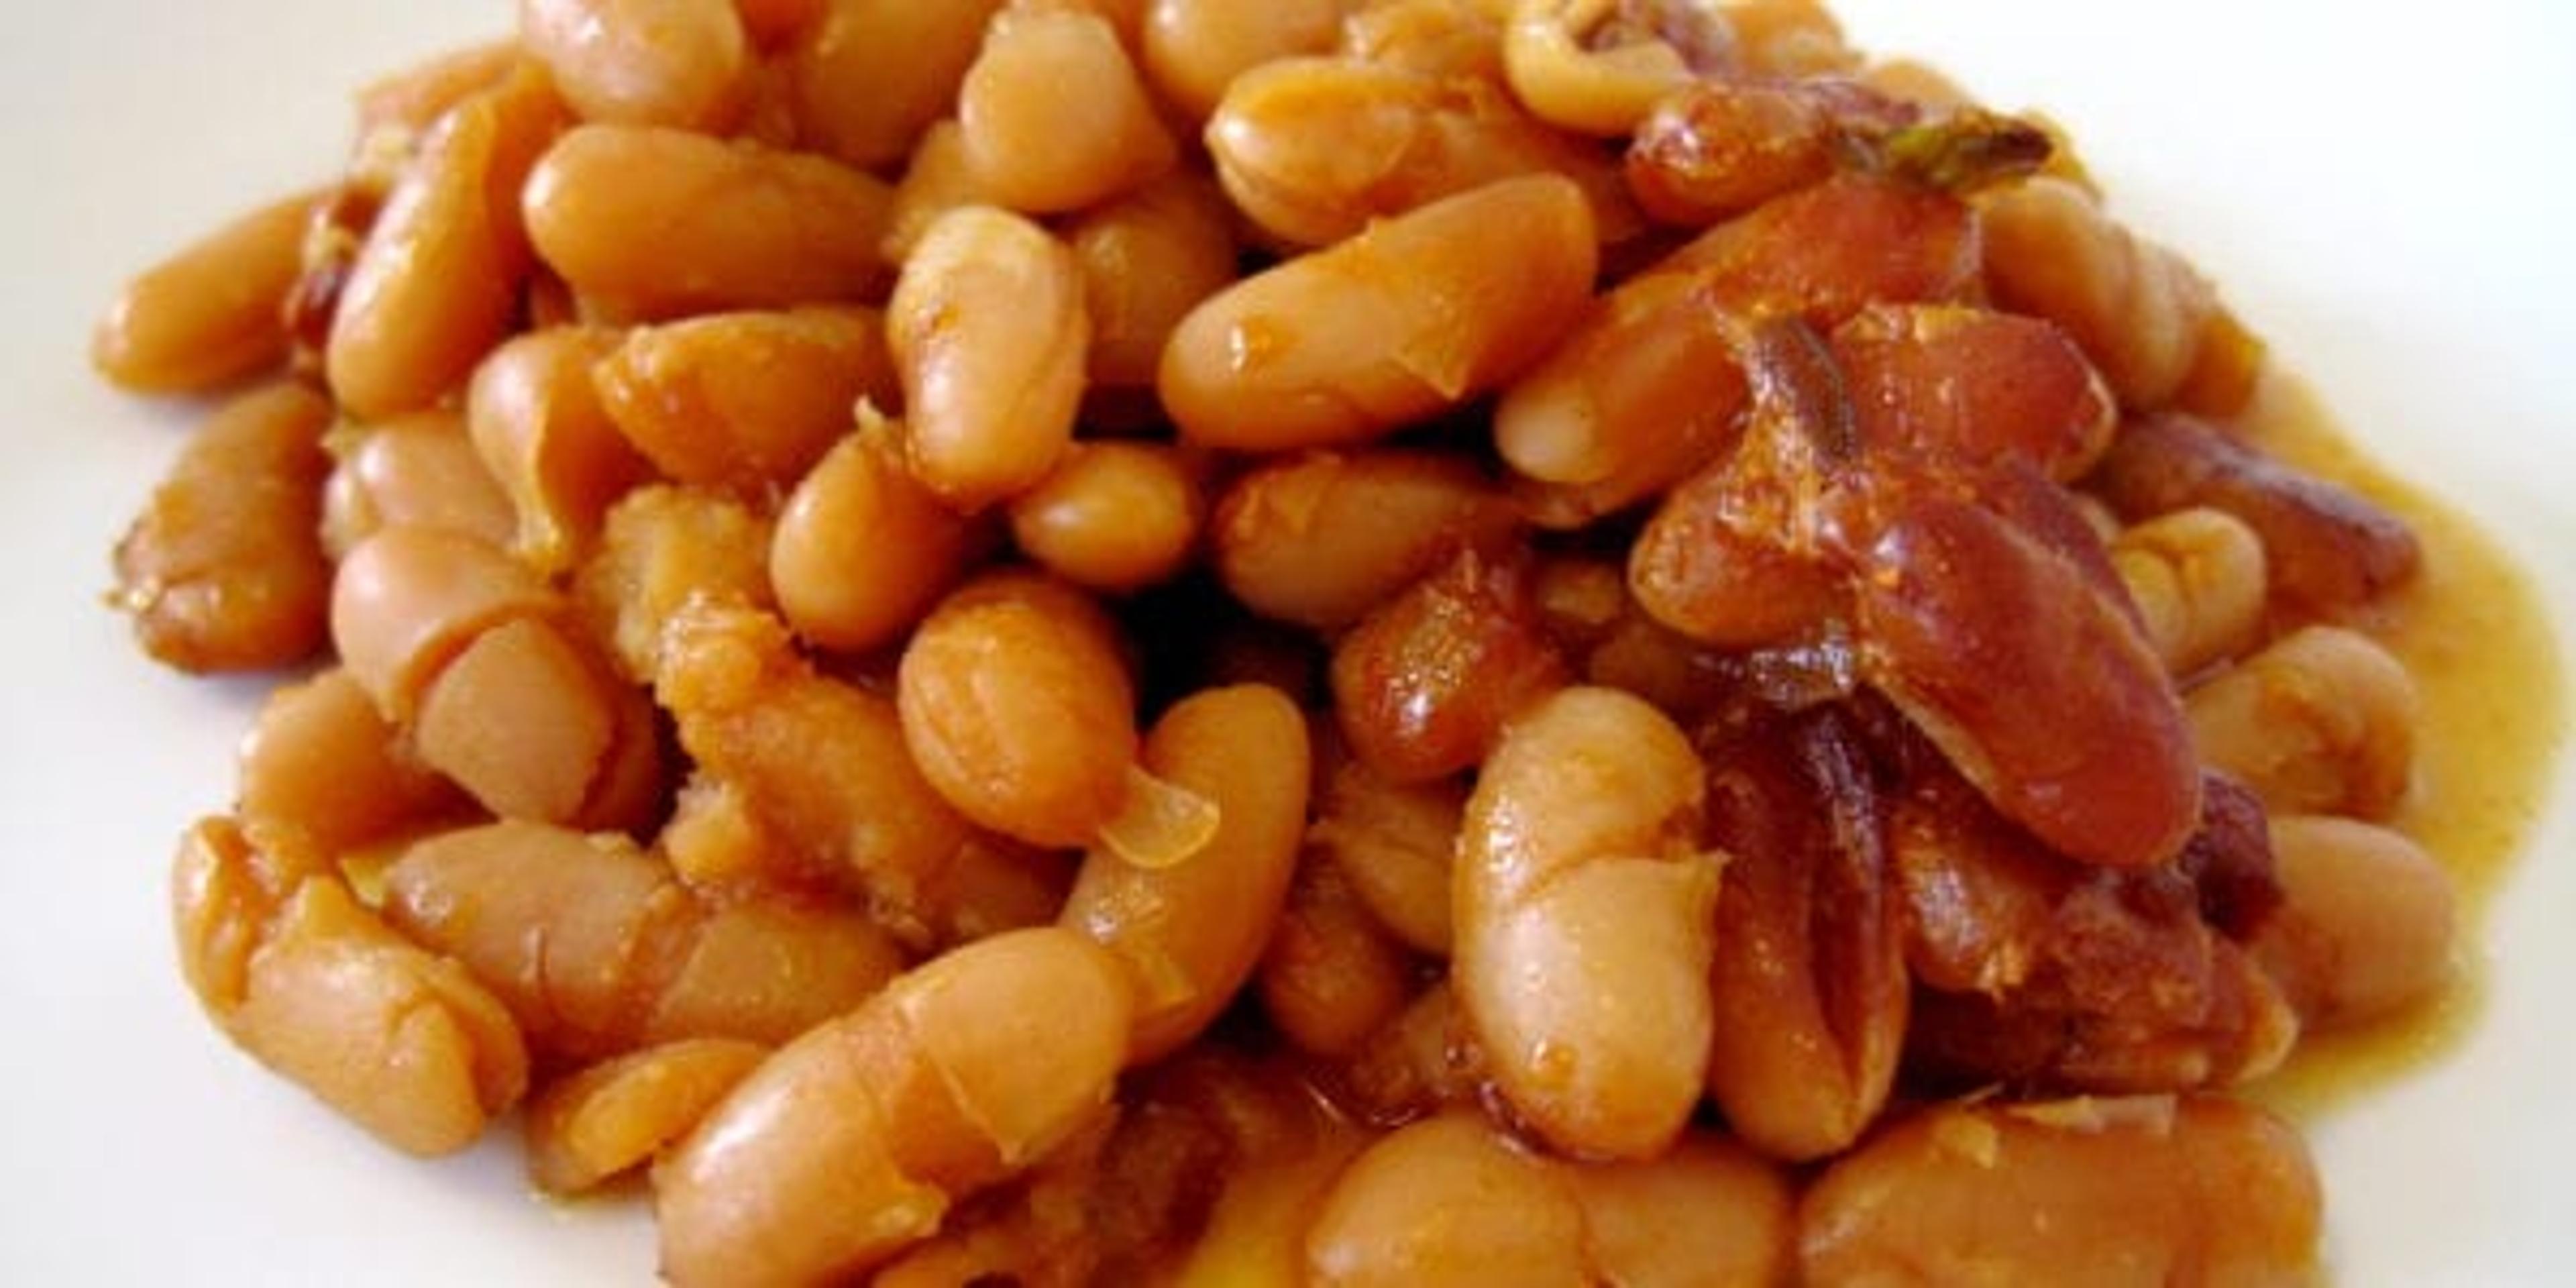 how healthy are baked beans